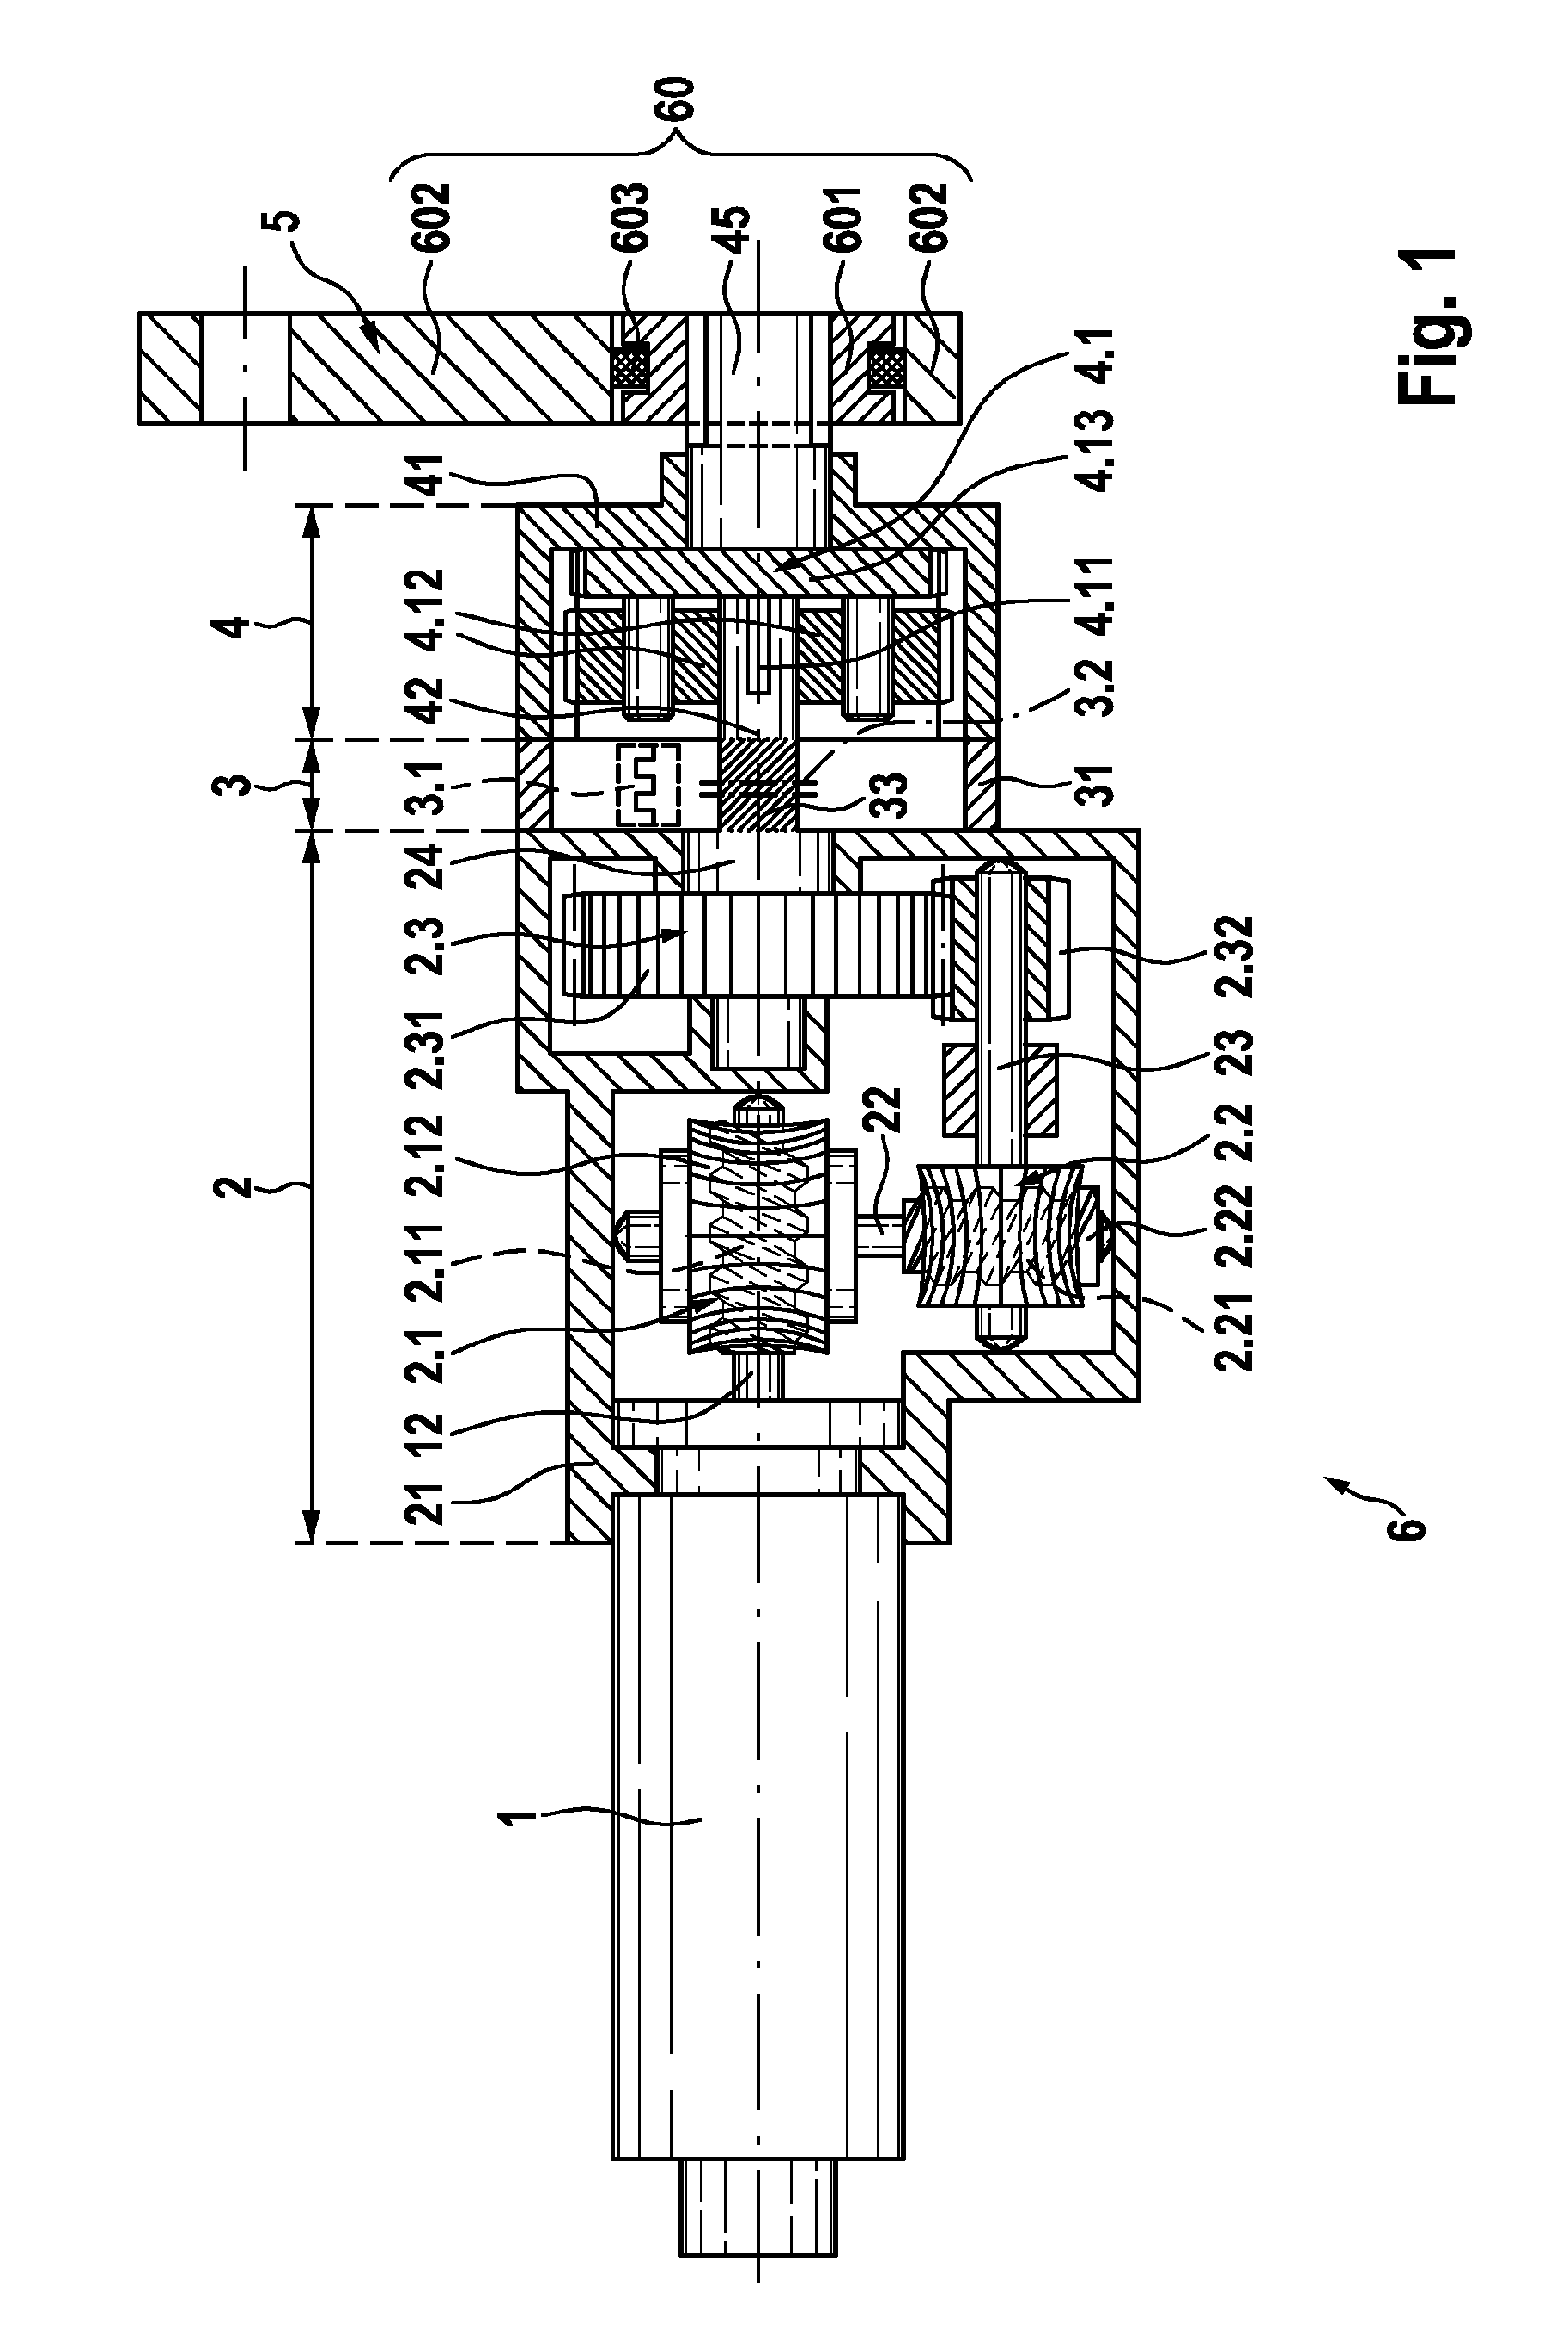 Adjustment drive with an integrated overload protector